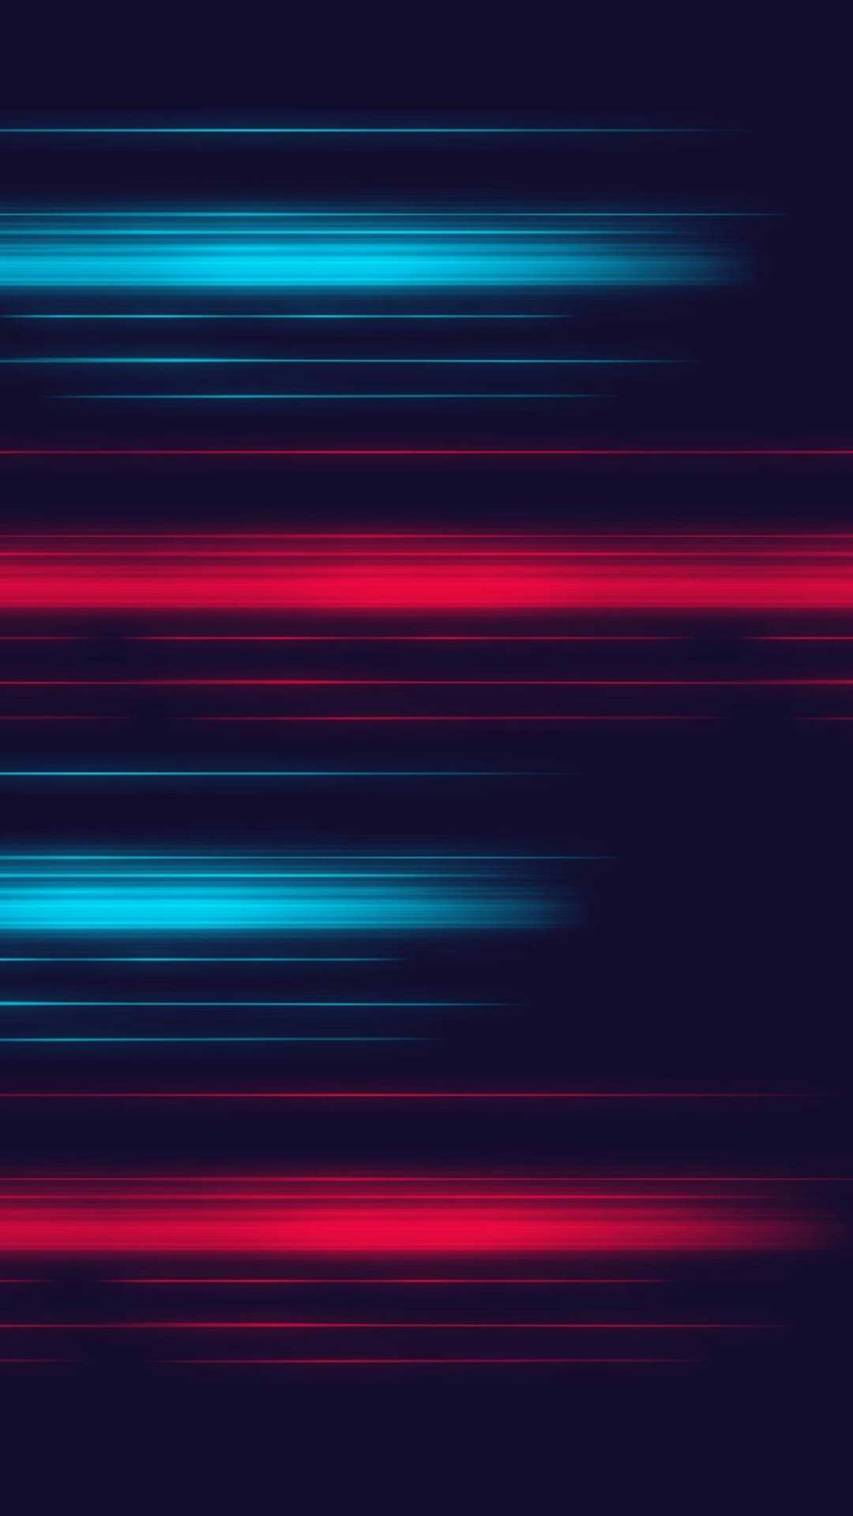 Free Neon Lines hd Wallpaper Pictures for iPhone